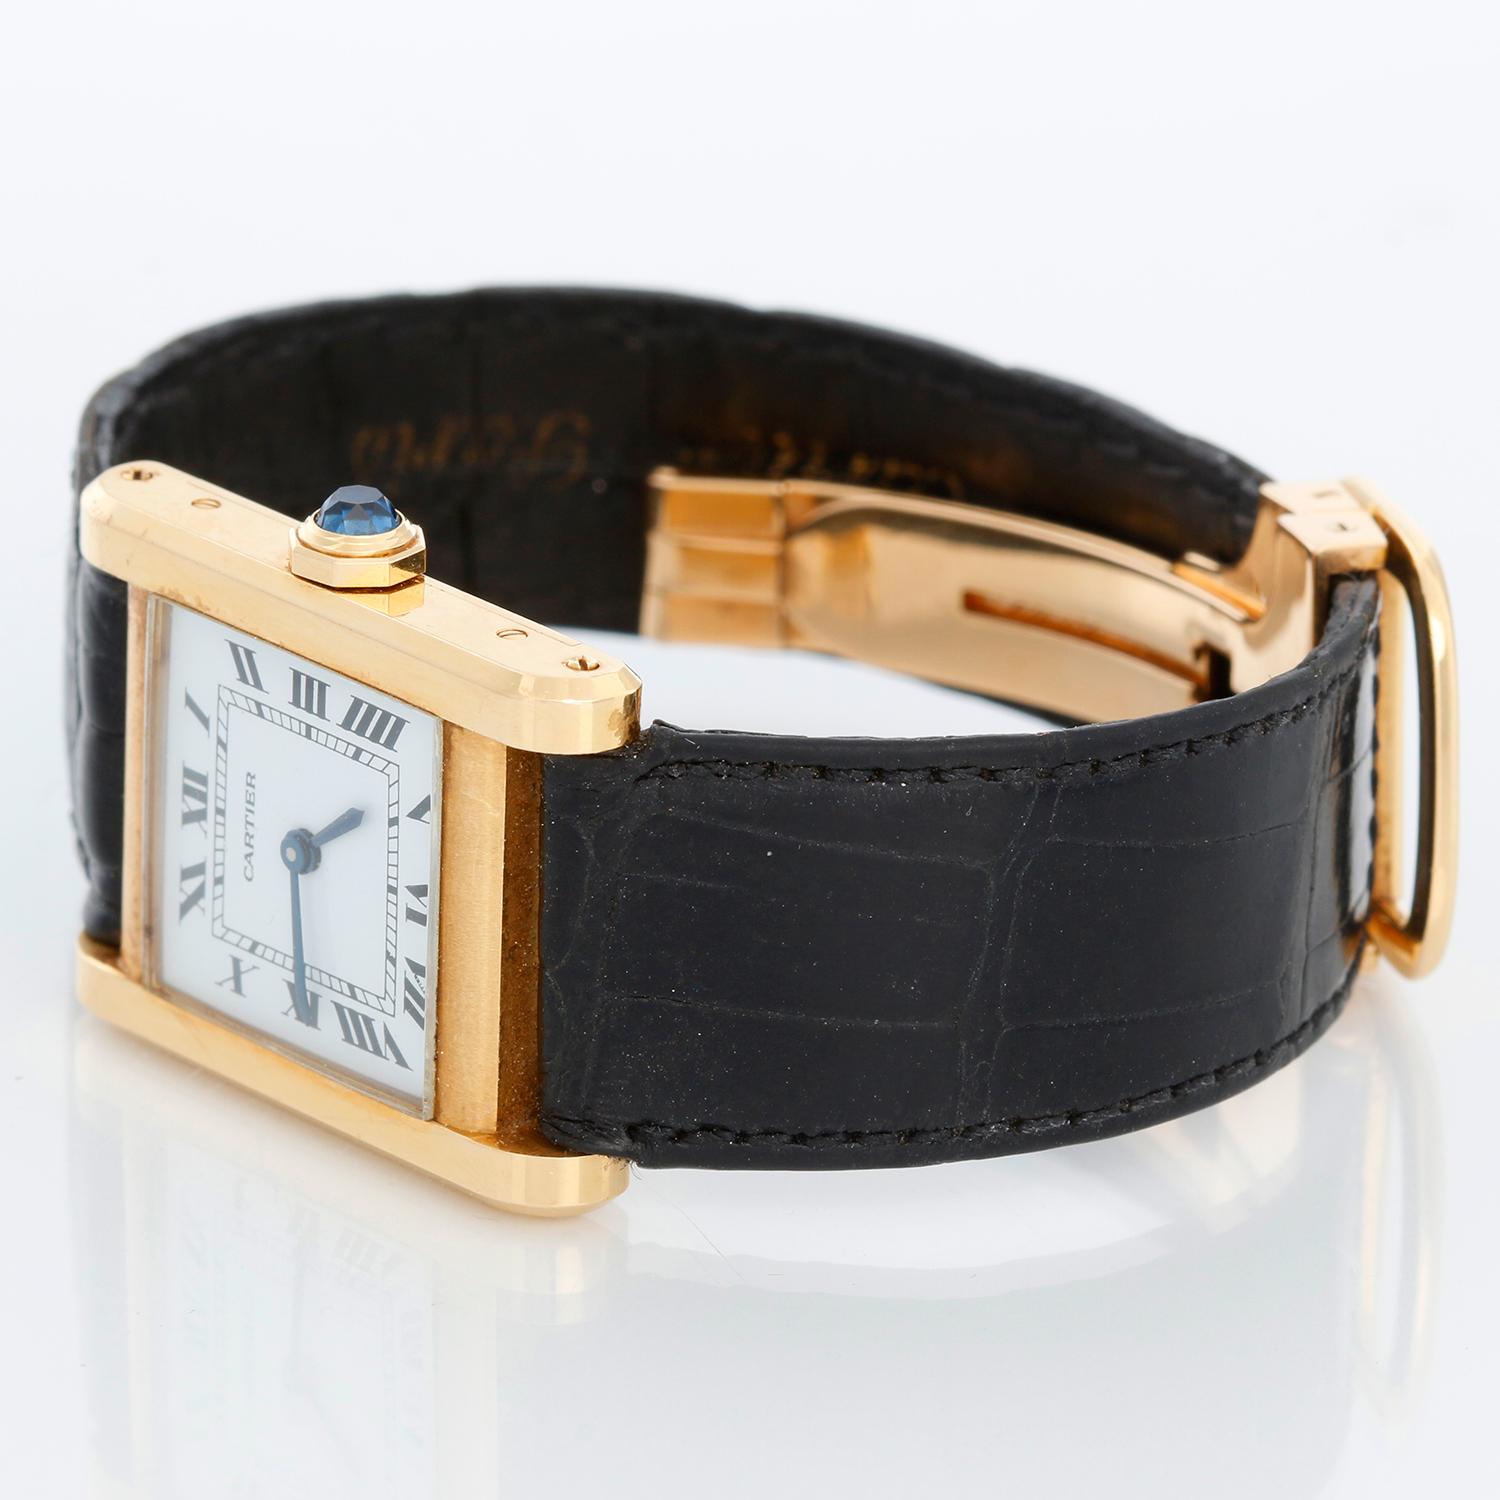 Cartier Tank Normale 18k Yellow Gold Men's Watch - Manual movement. 18k yellow gold case ( 23 mm x 30 mm ). White dial with black Roman numerals. Black strap band with 18k yellow gold Cartier buckle. Pre-owned with Cartier box, books and papers.